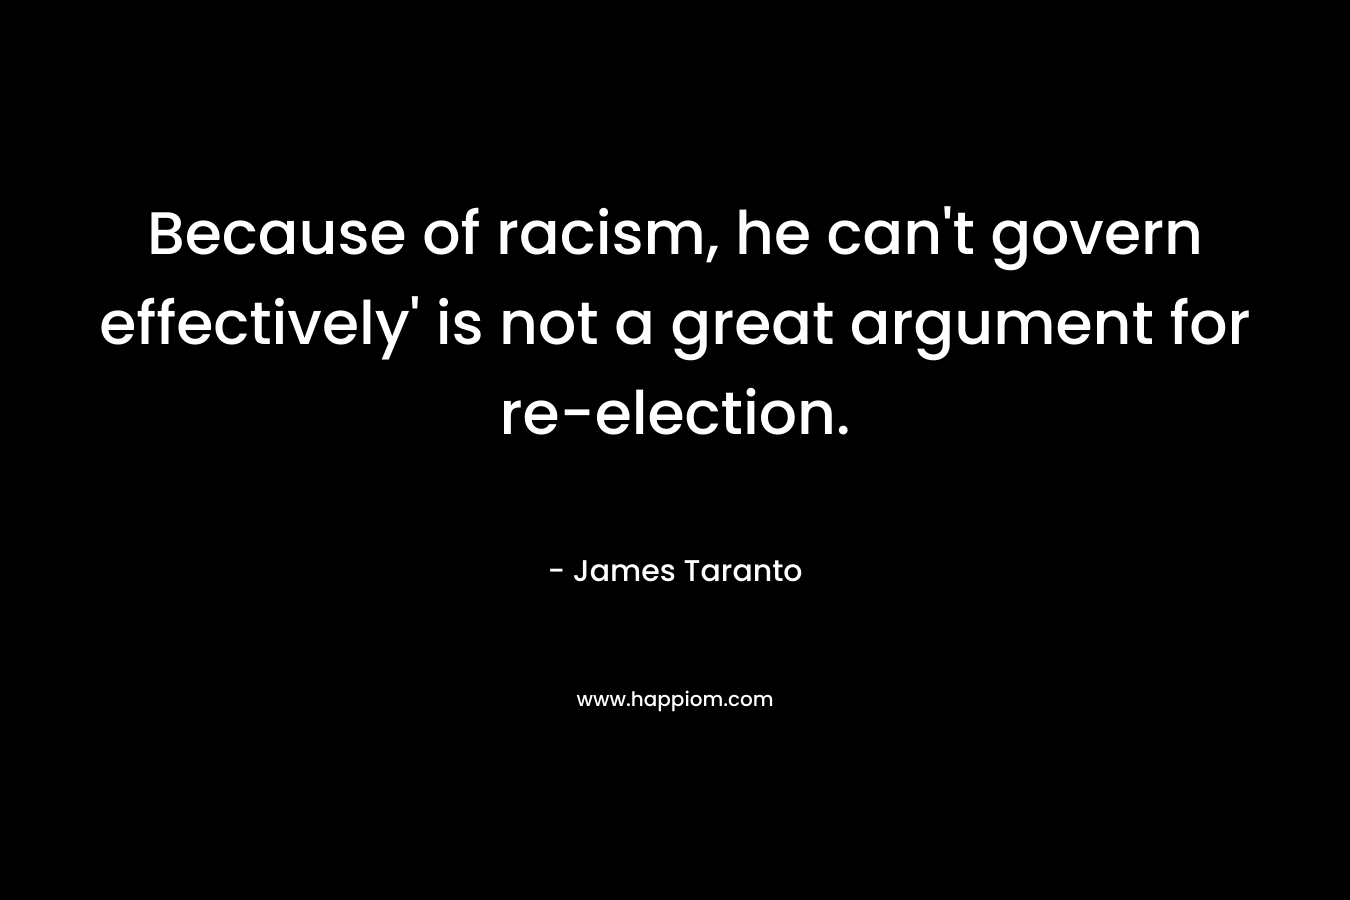 Because of racism, he can’t govern effectively’ is not a great argument for re-election. – James Taranto